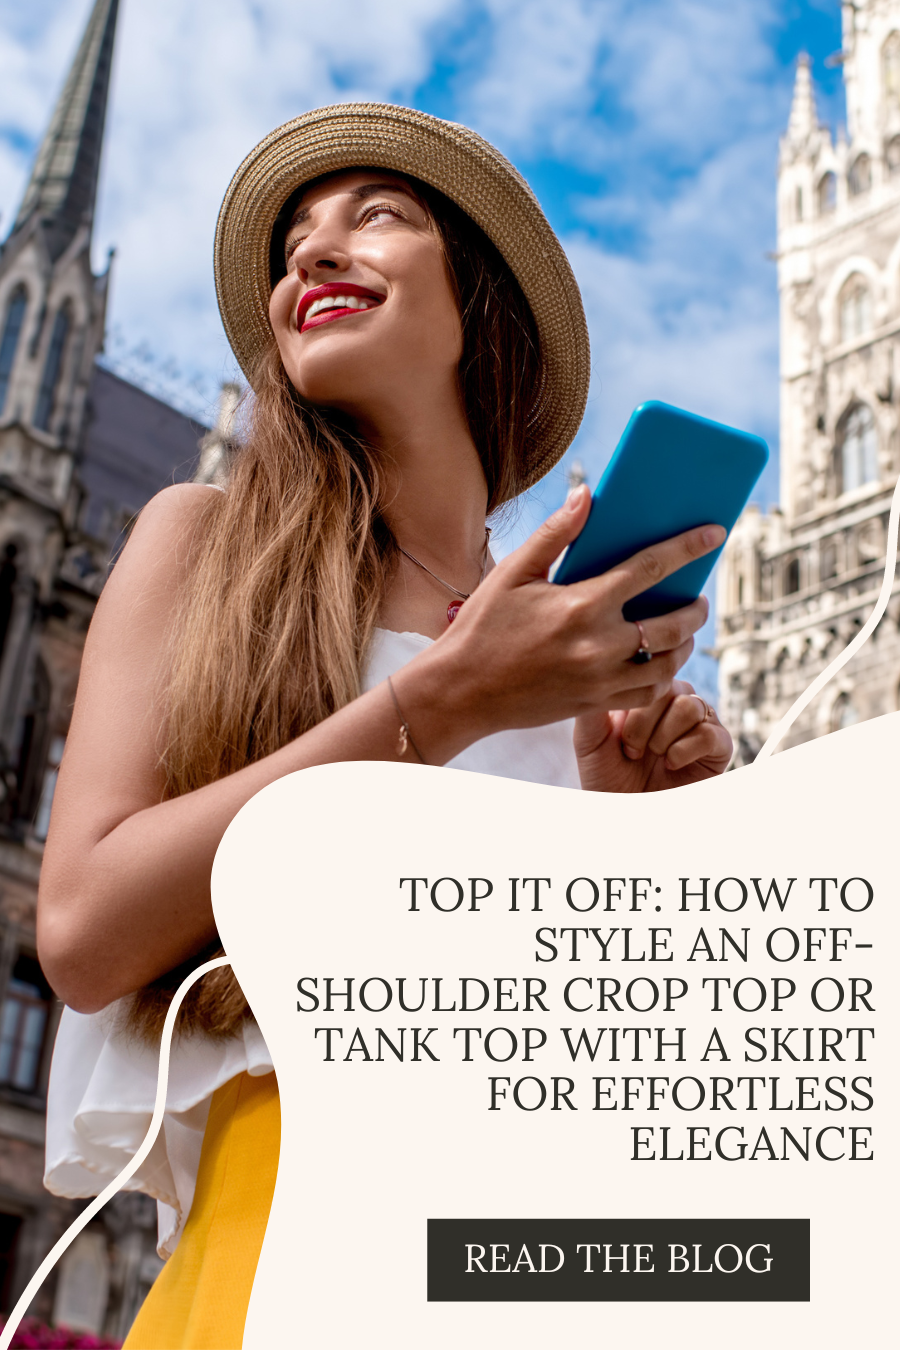 Top It Off: How to Style an Off-Shoulder Crop Top or Tank Top with a Skirt for Effortless Elegance